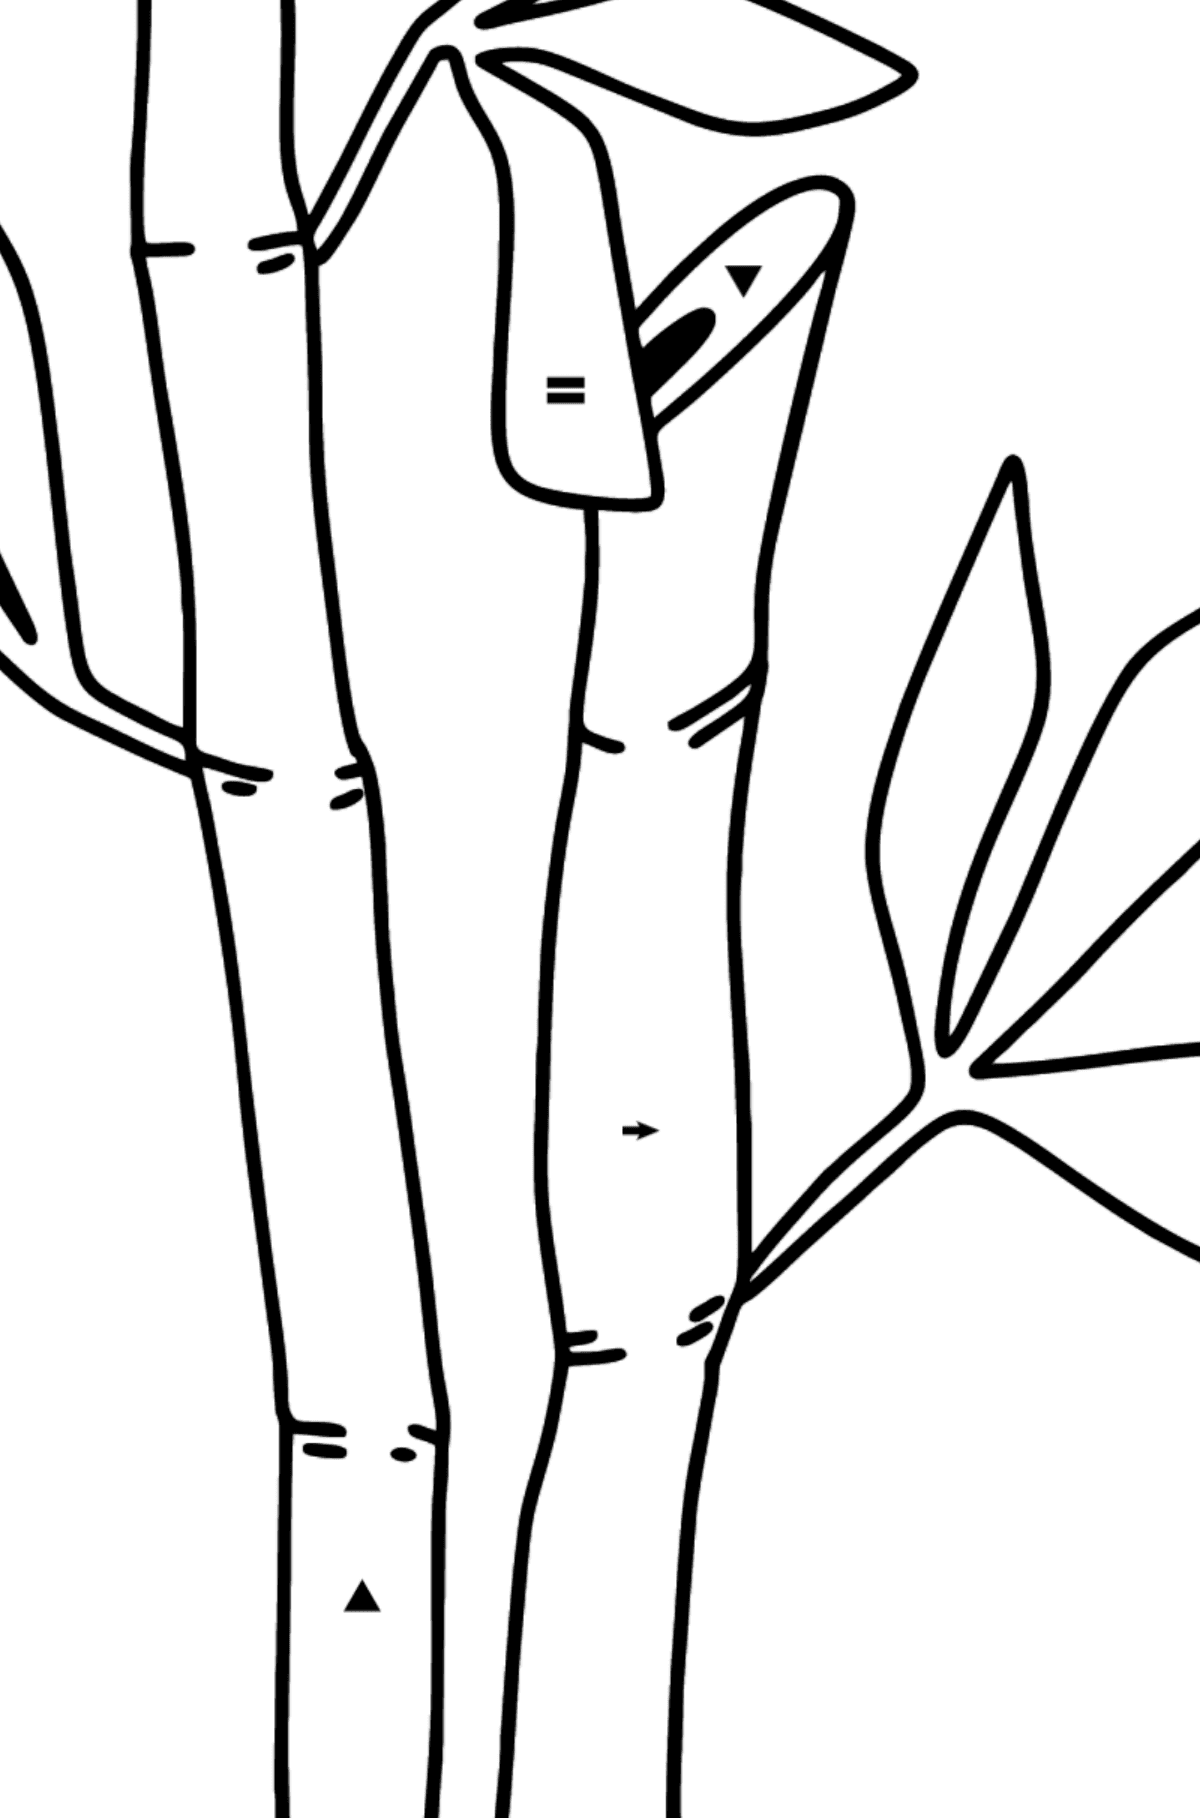 Bamboo coloring page - Coloring by Symbols for Kids